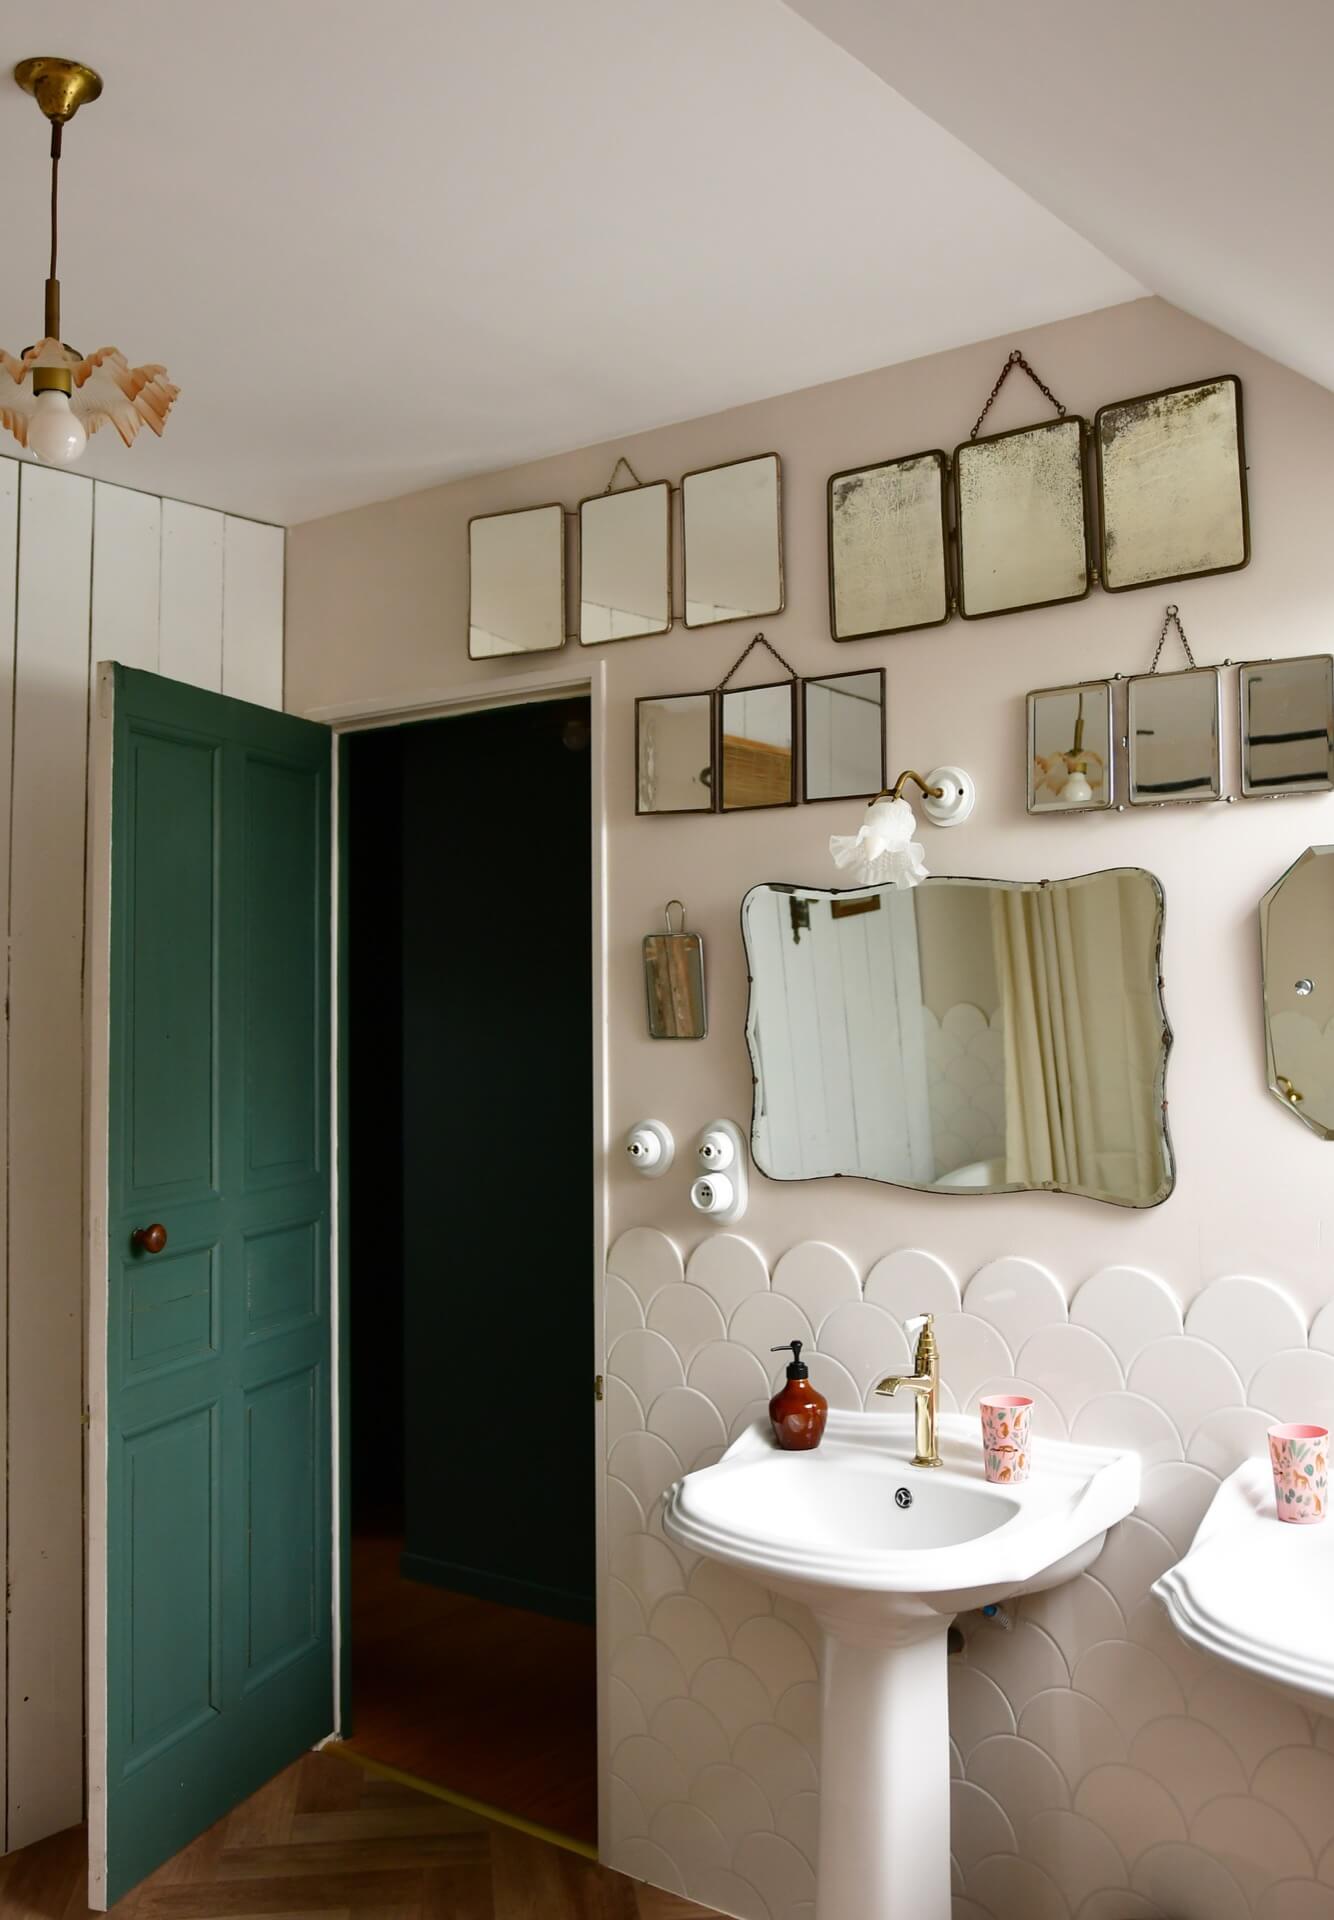 Bathroom with a wall of old vintage mirrors